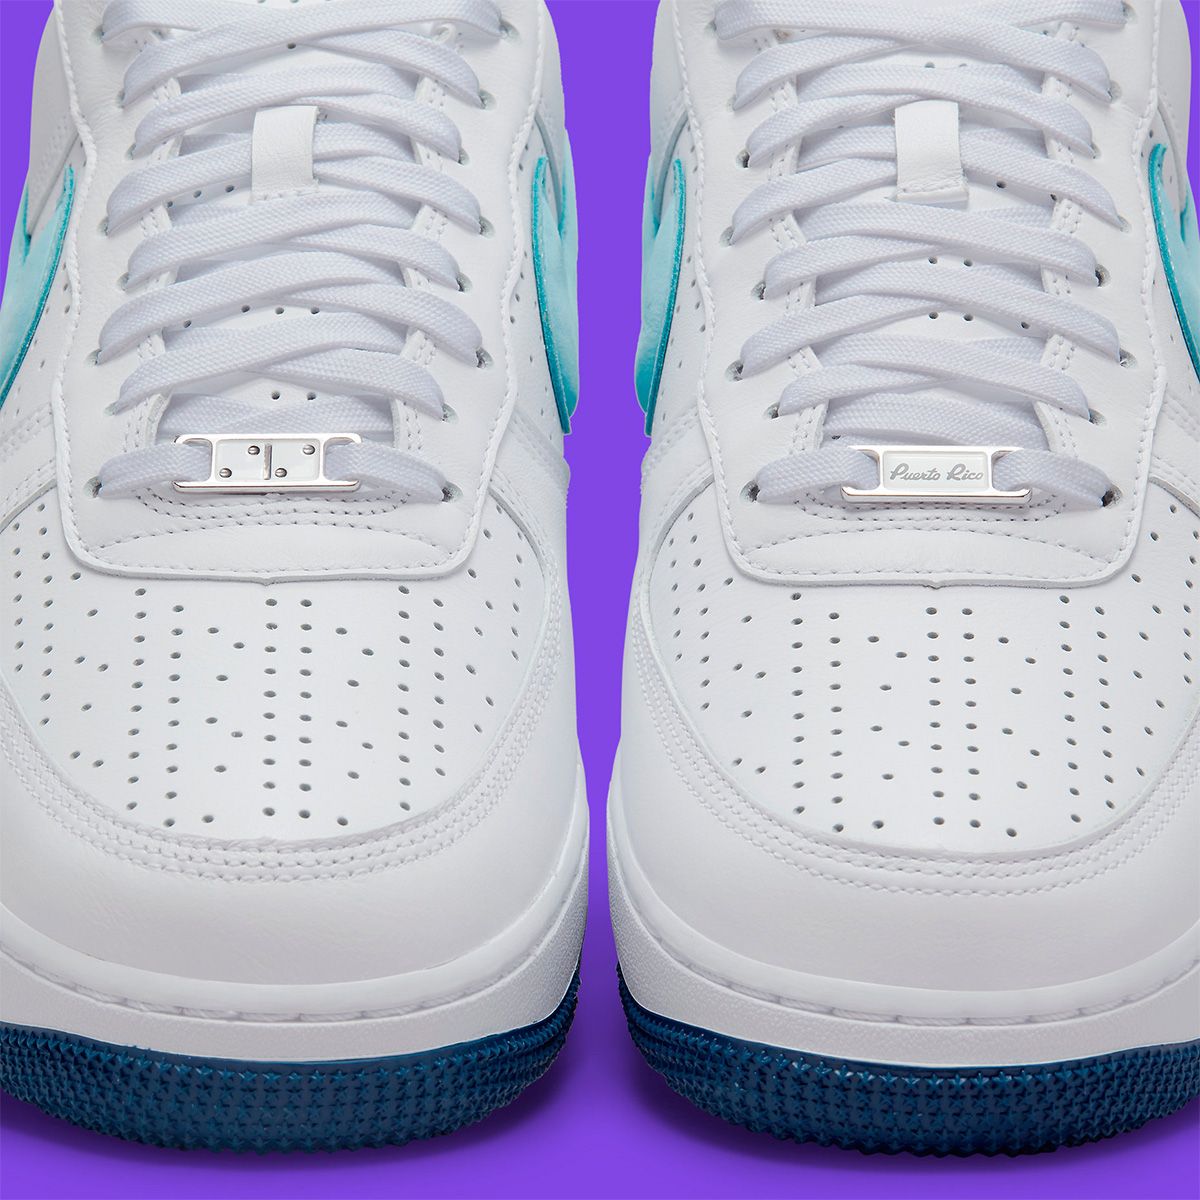 Where to Buy the Nike Air Force 1 Low “Puerto Rico” 2022 | House